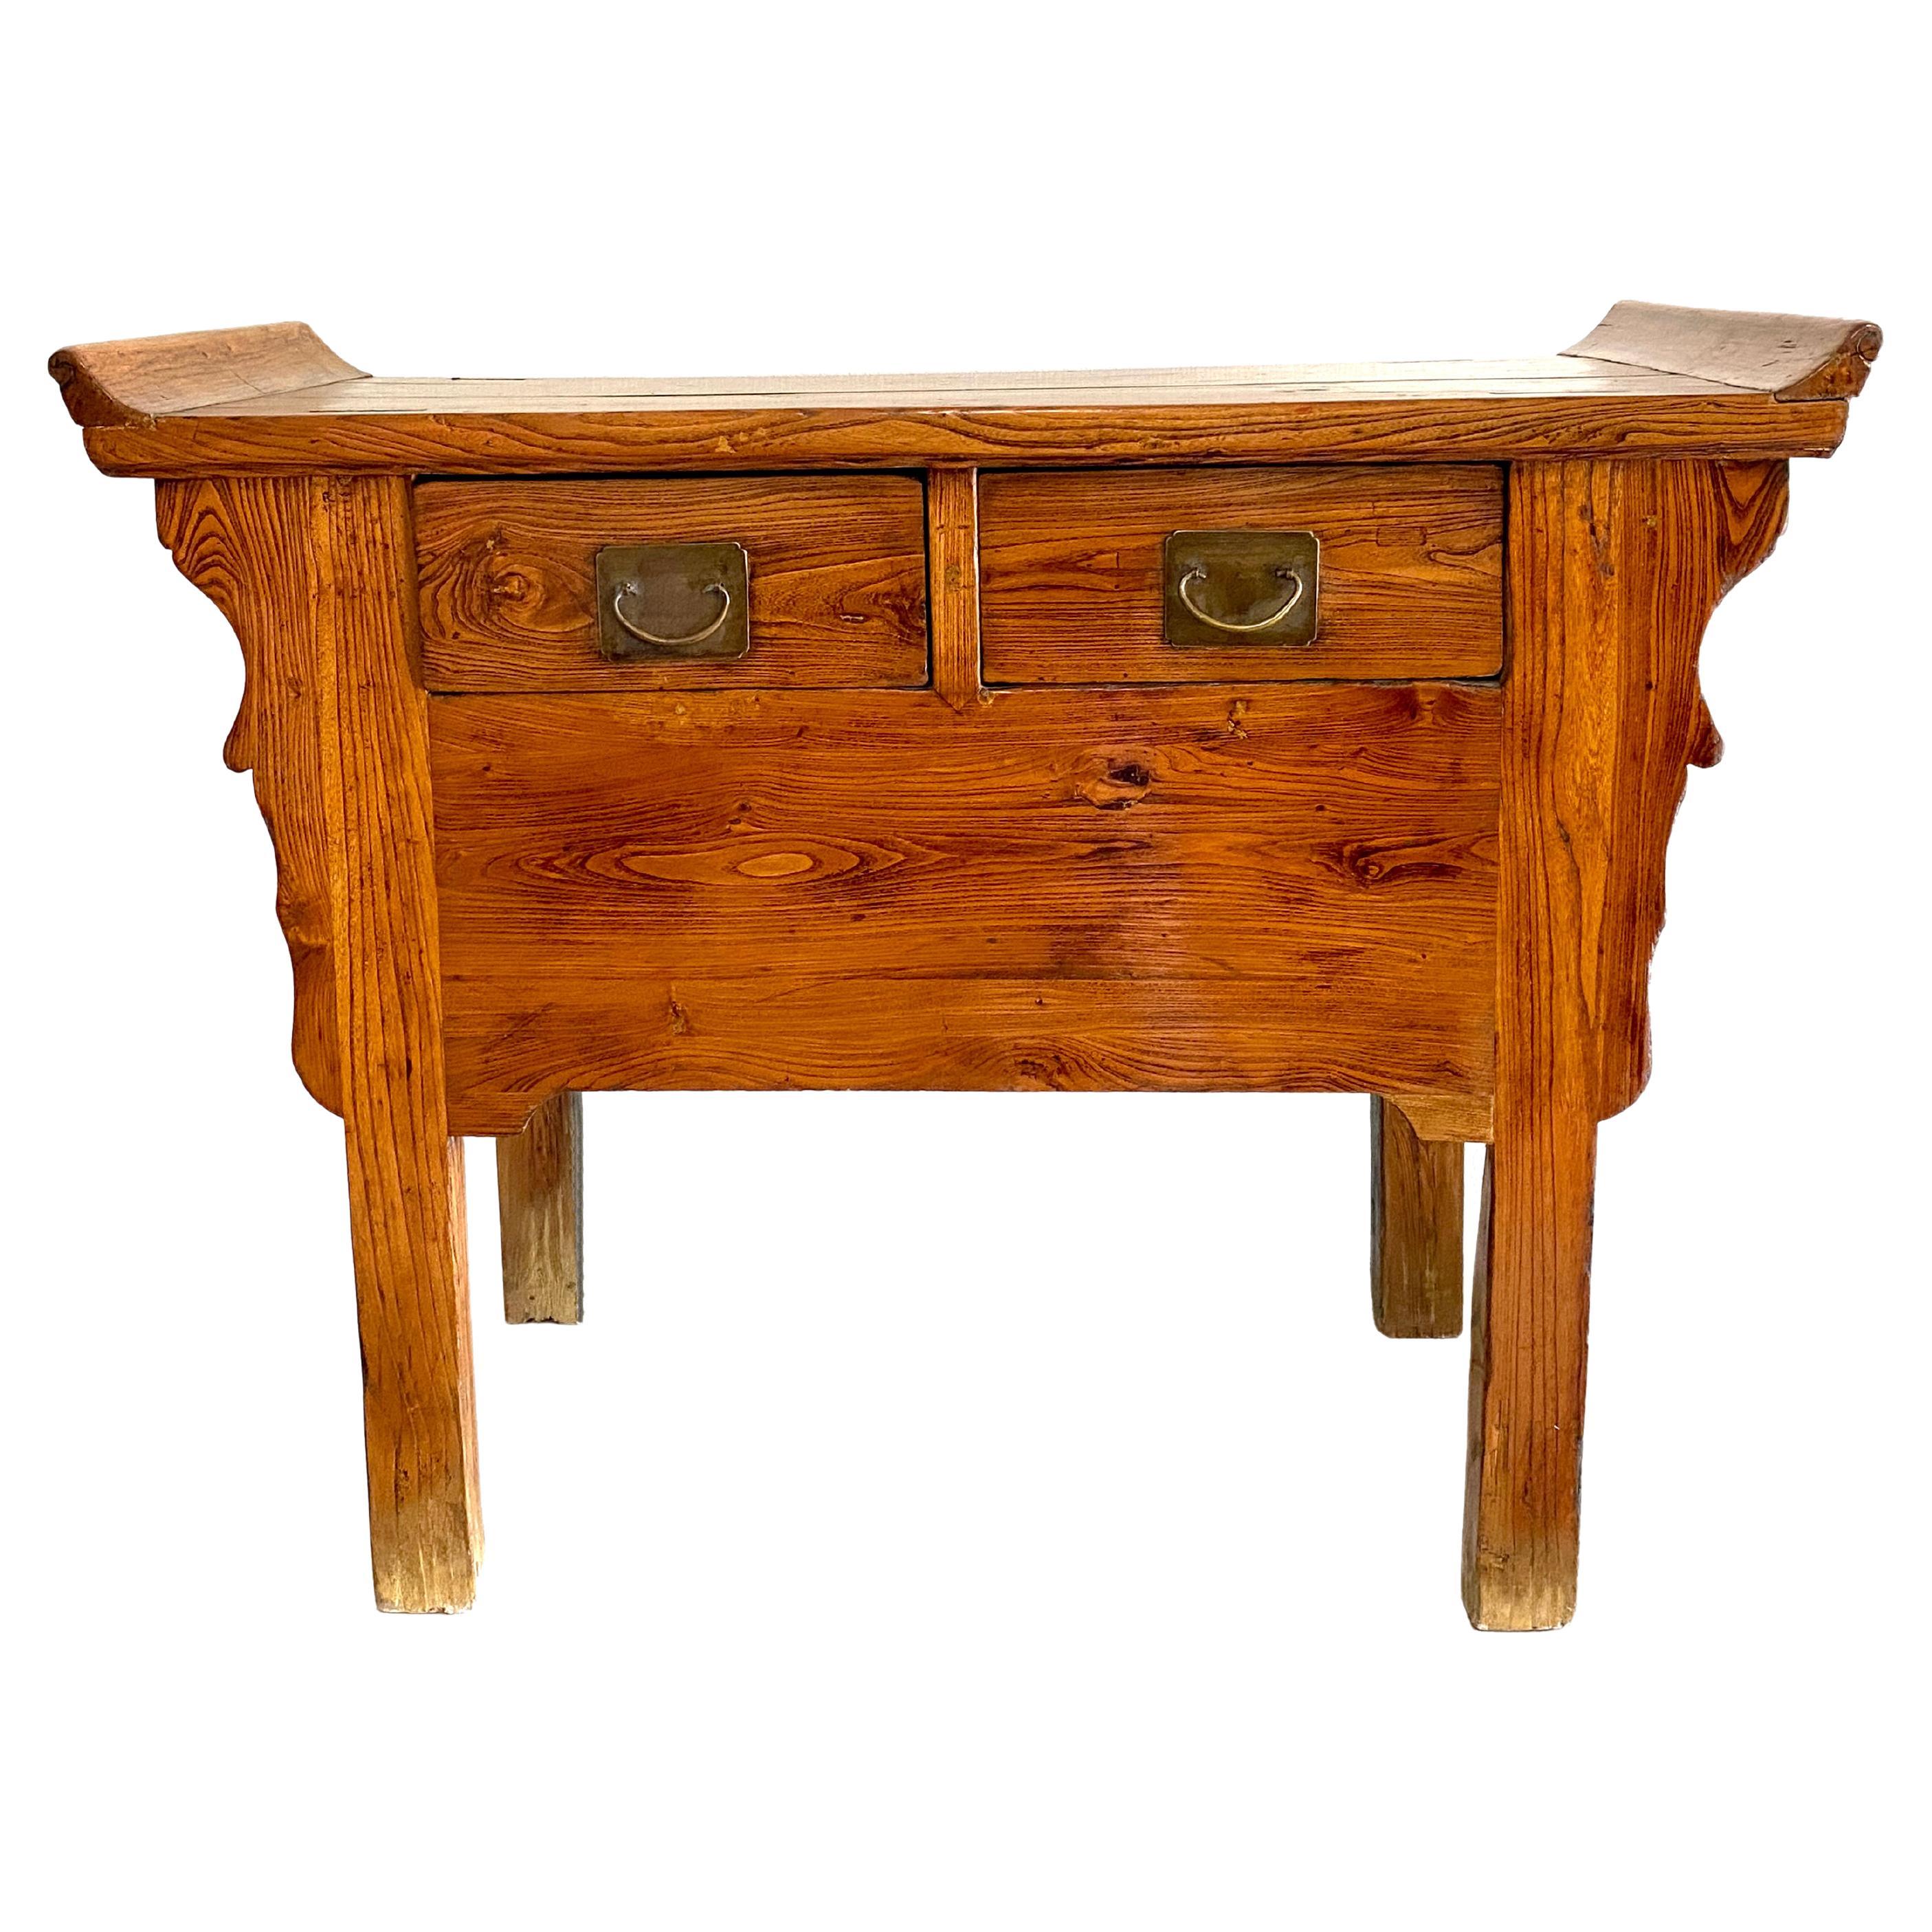 Early 20th Century Antique Chinese Beech Hardwood Double Drawer Coffer Table